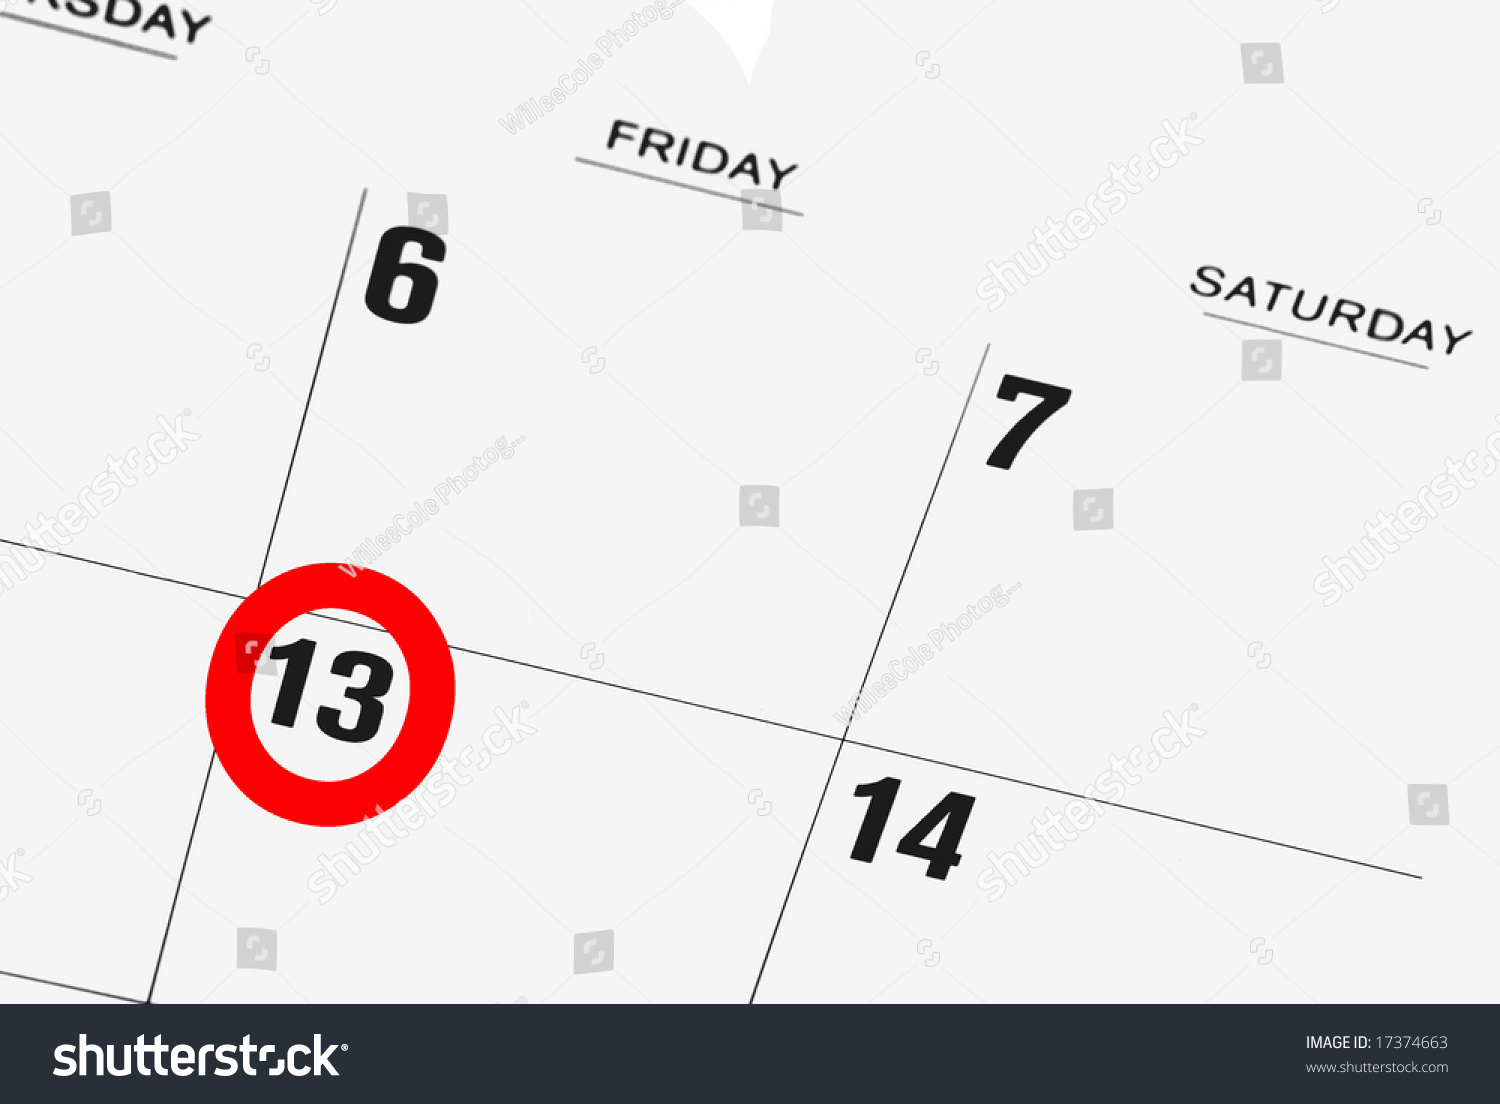 Calendar With Friday The Thirteenth Circled In Red Stock Photo 17374663